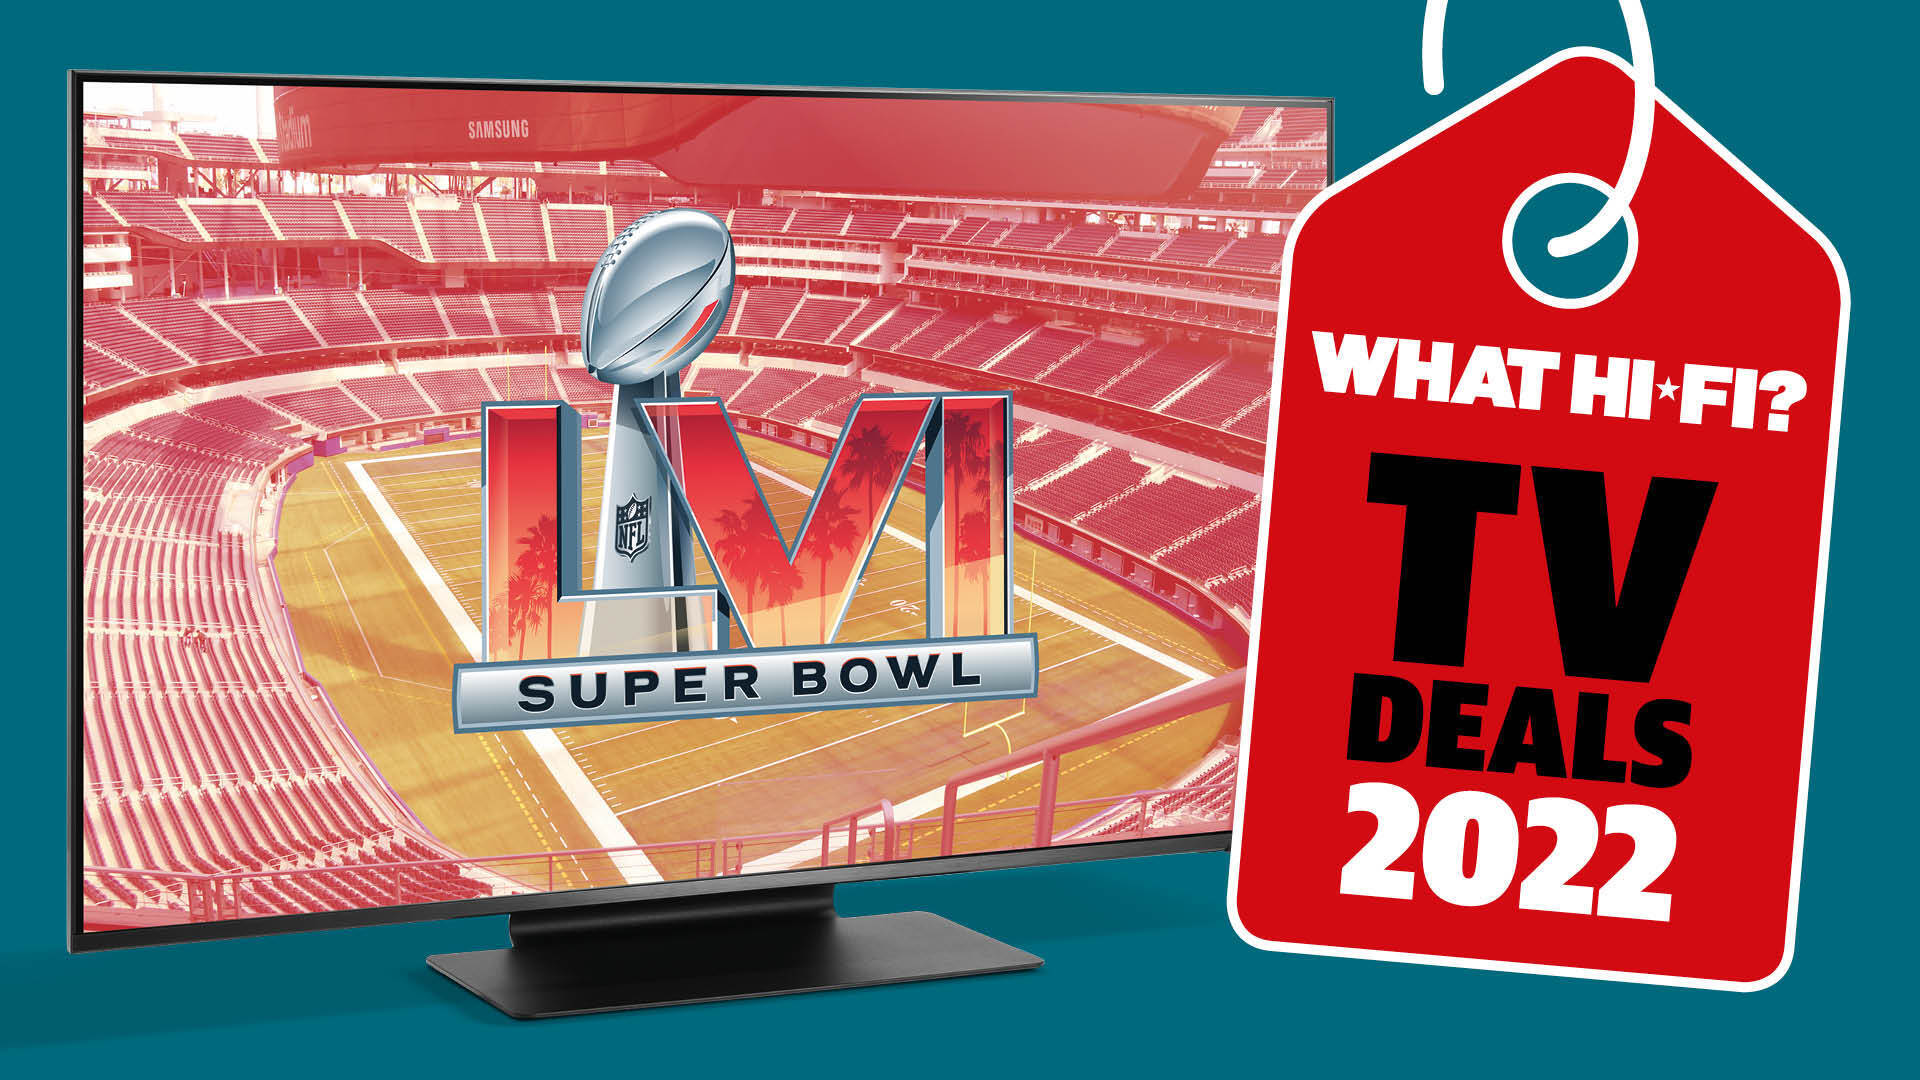 This Samsung 77-inch OLED TV is $1600 off for the Super Bowl